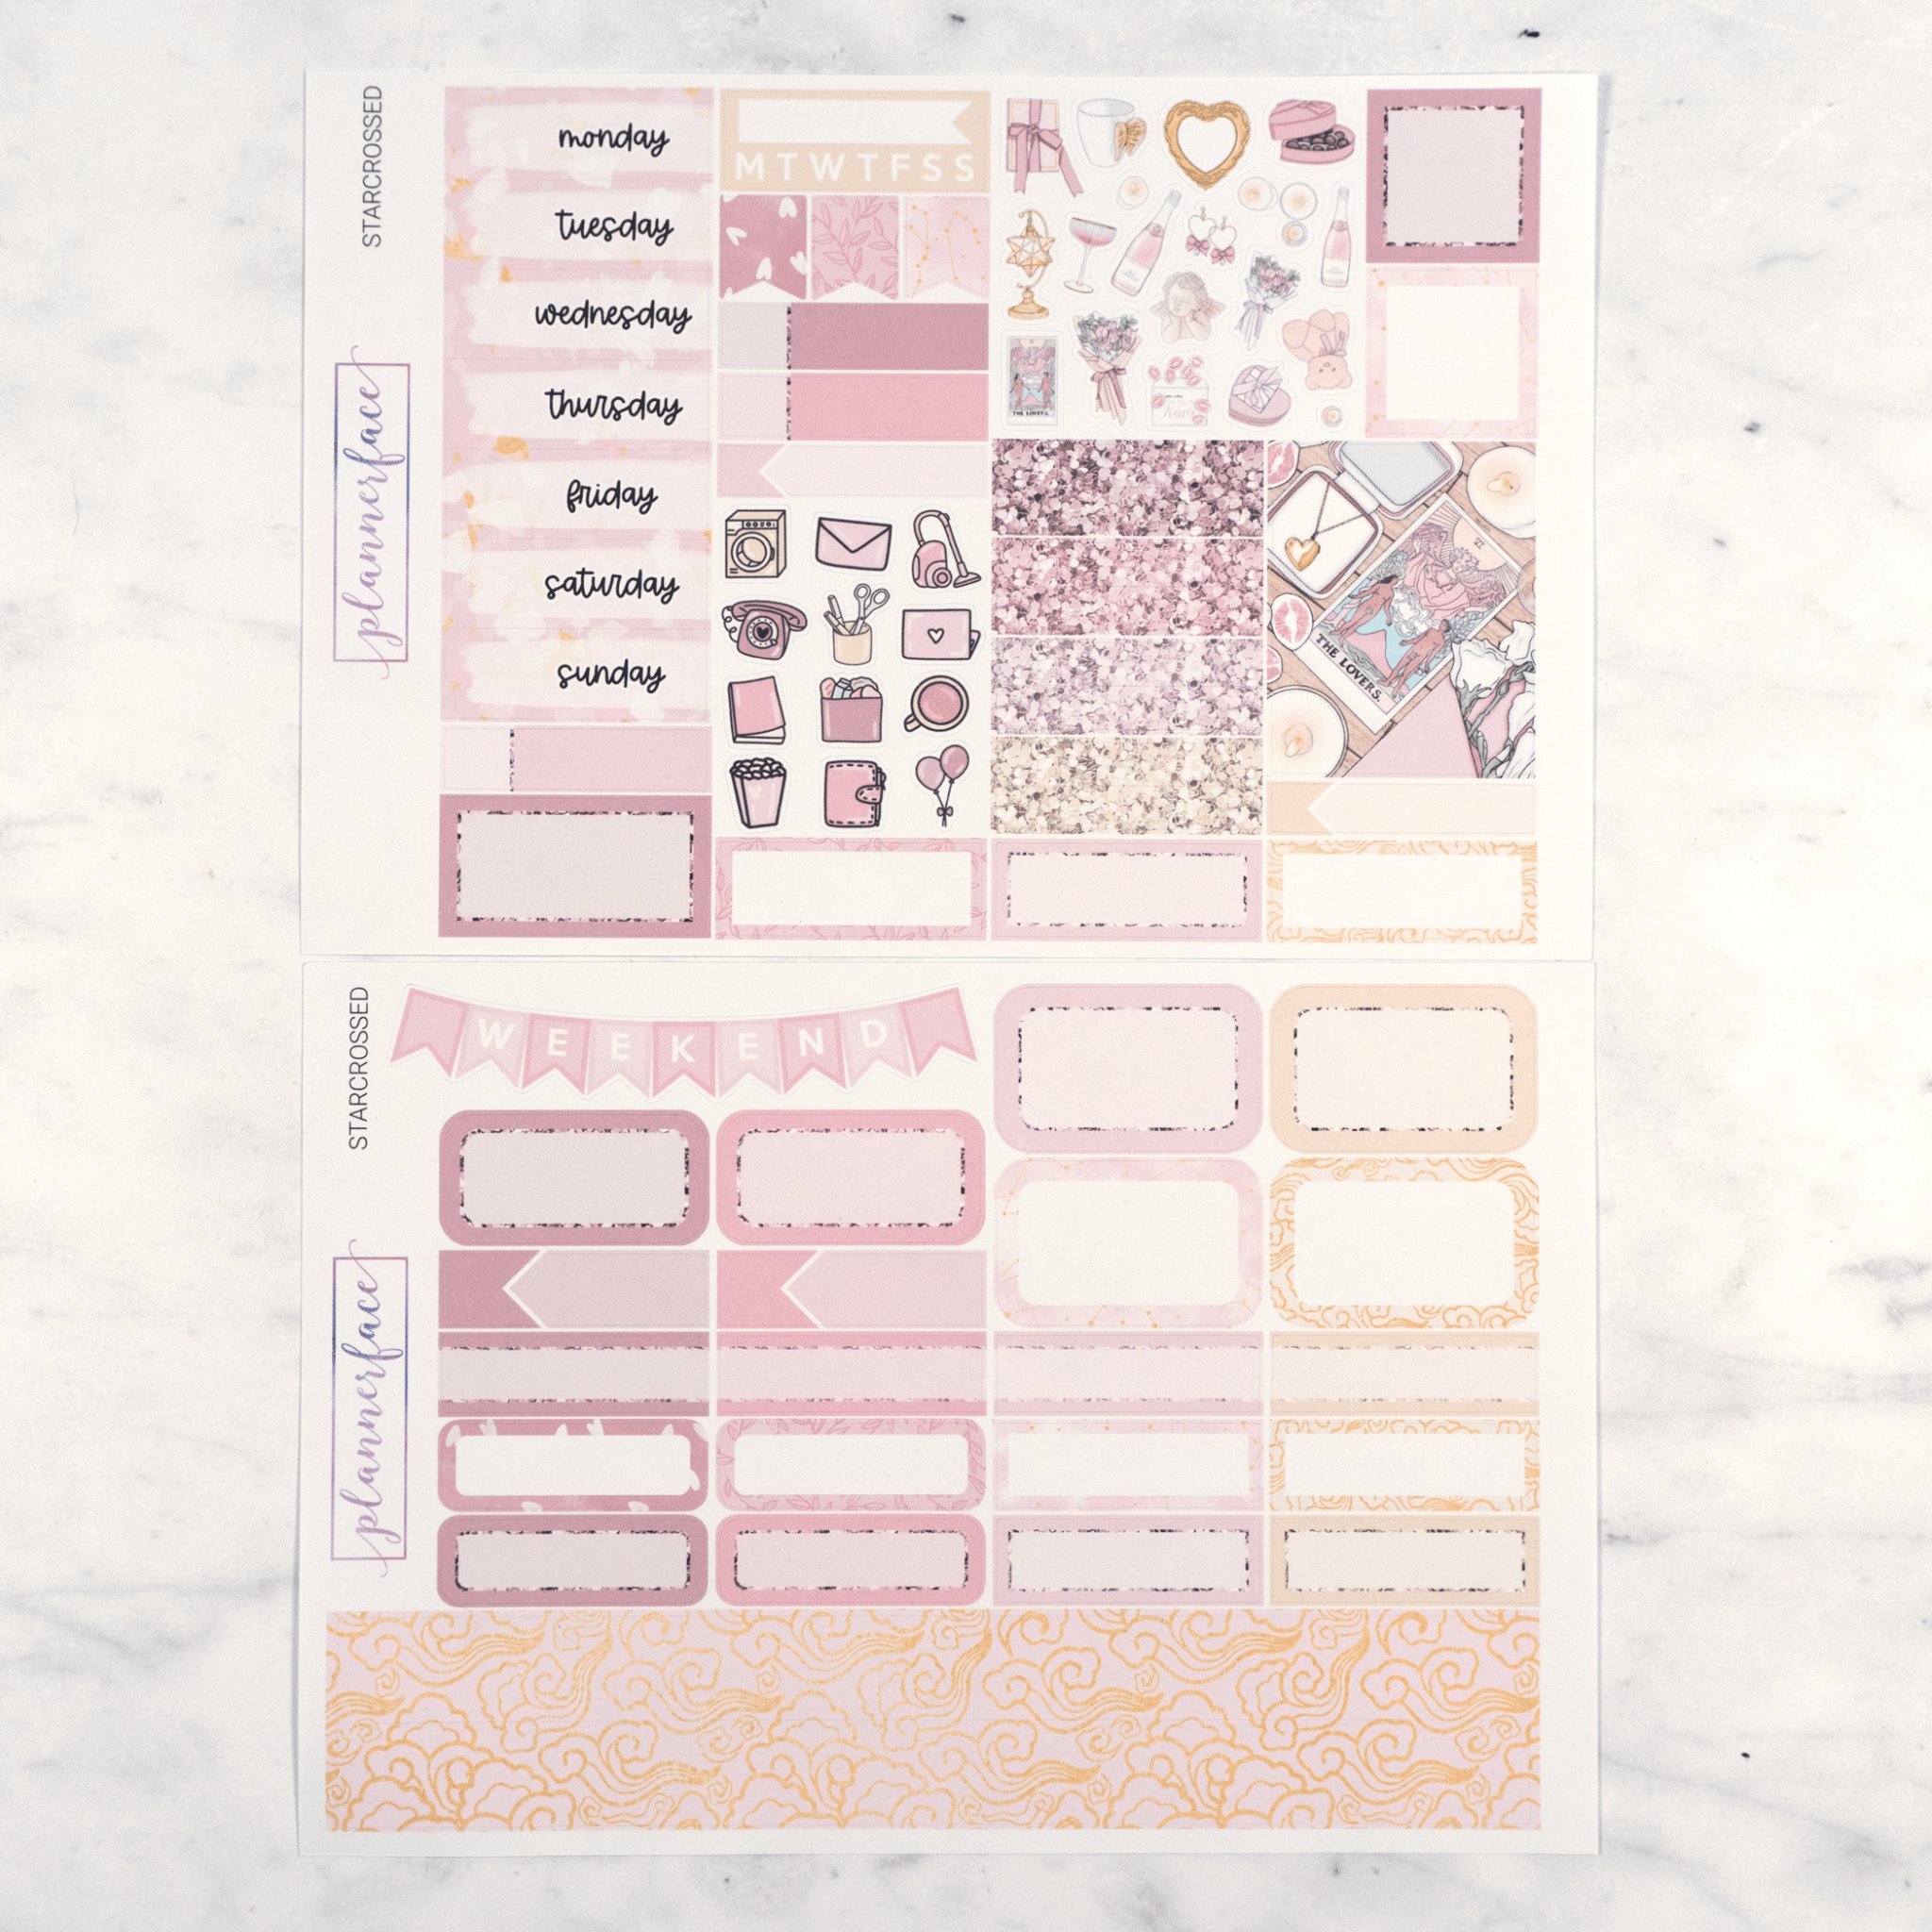 Starcrossed Mini Kit by Plannerface